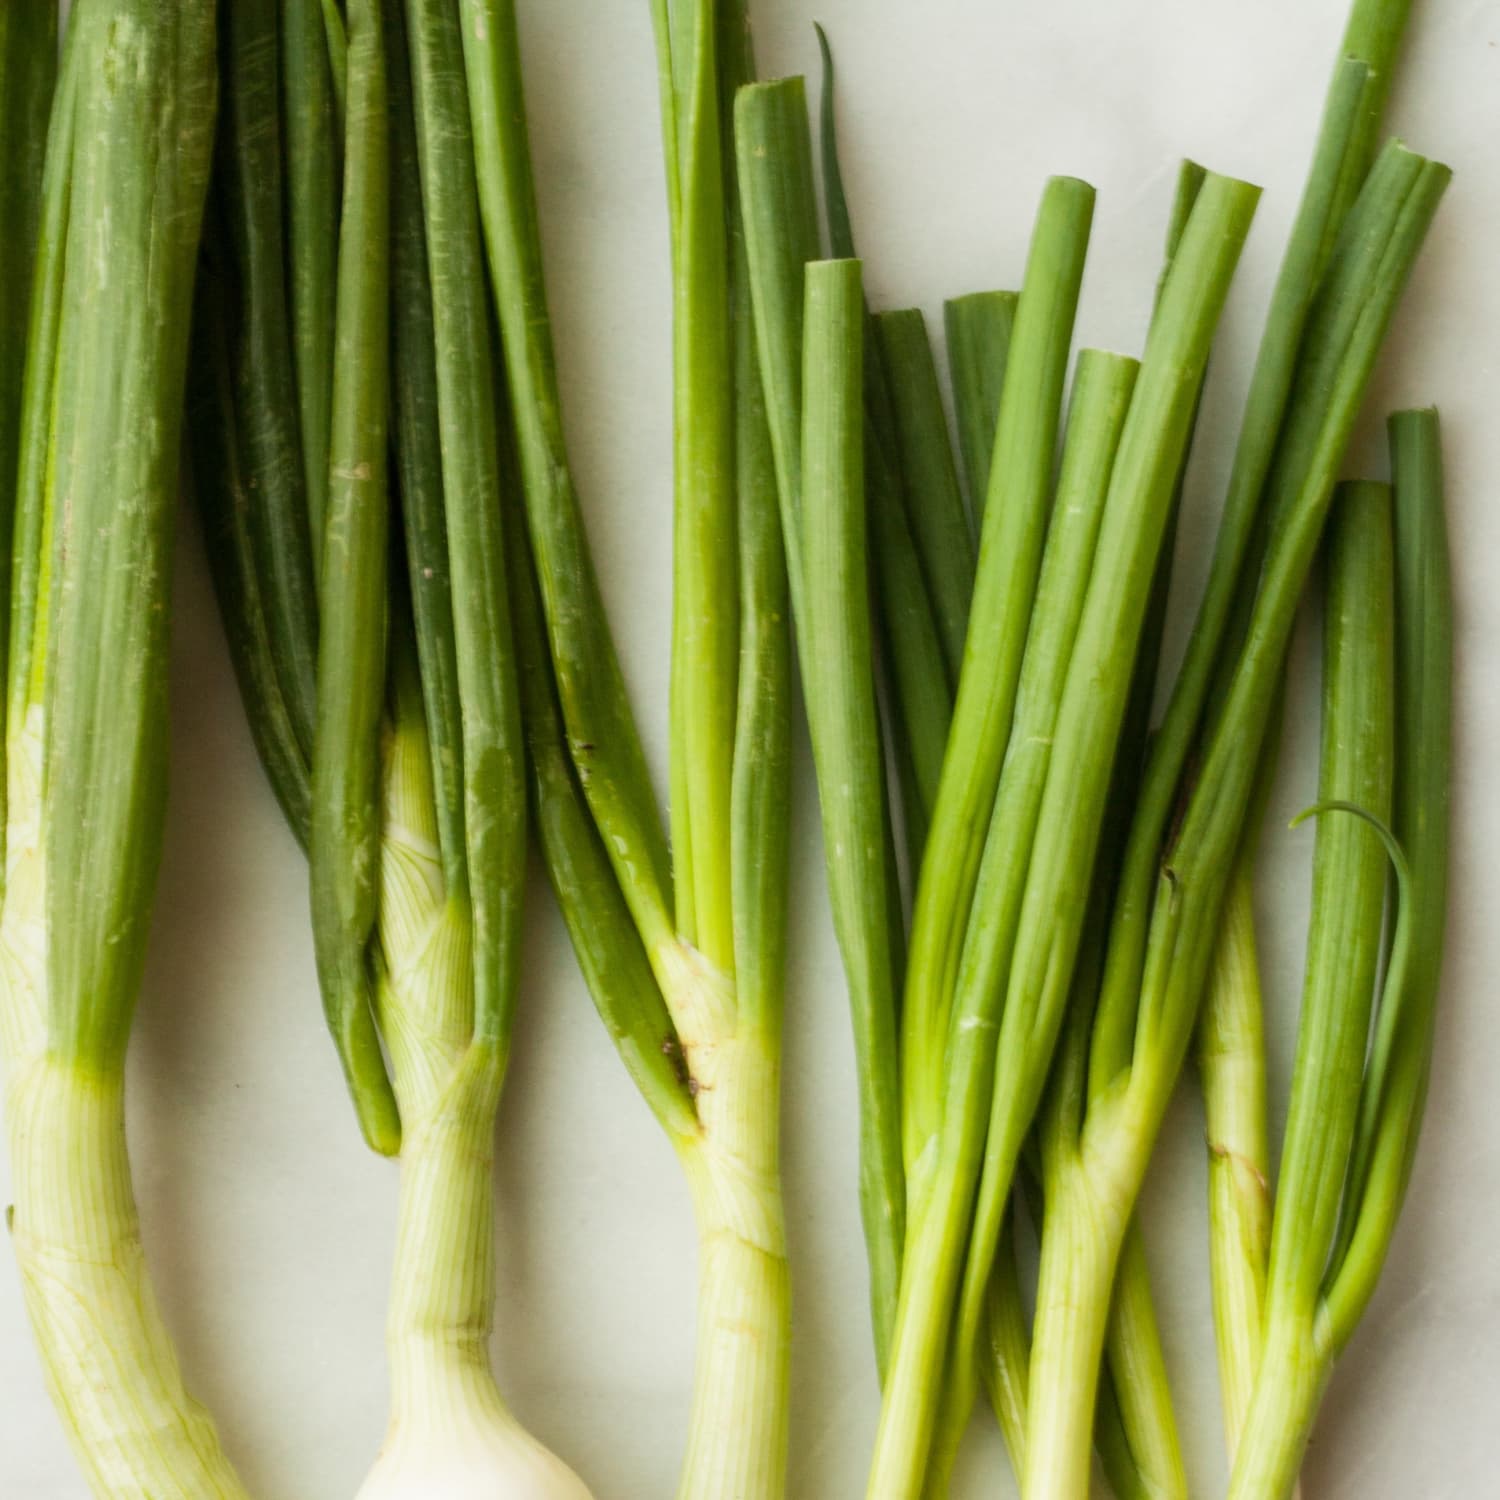 The difference between shallots, green onions, scallions and